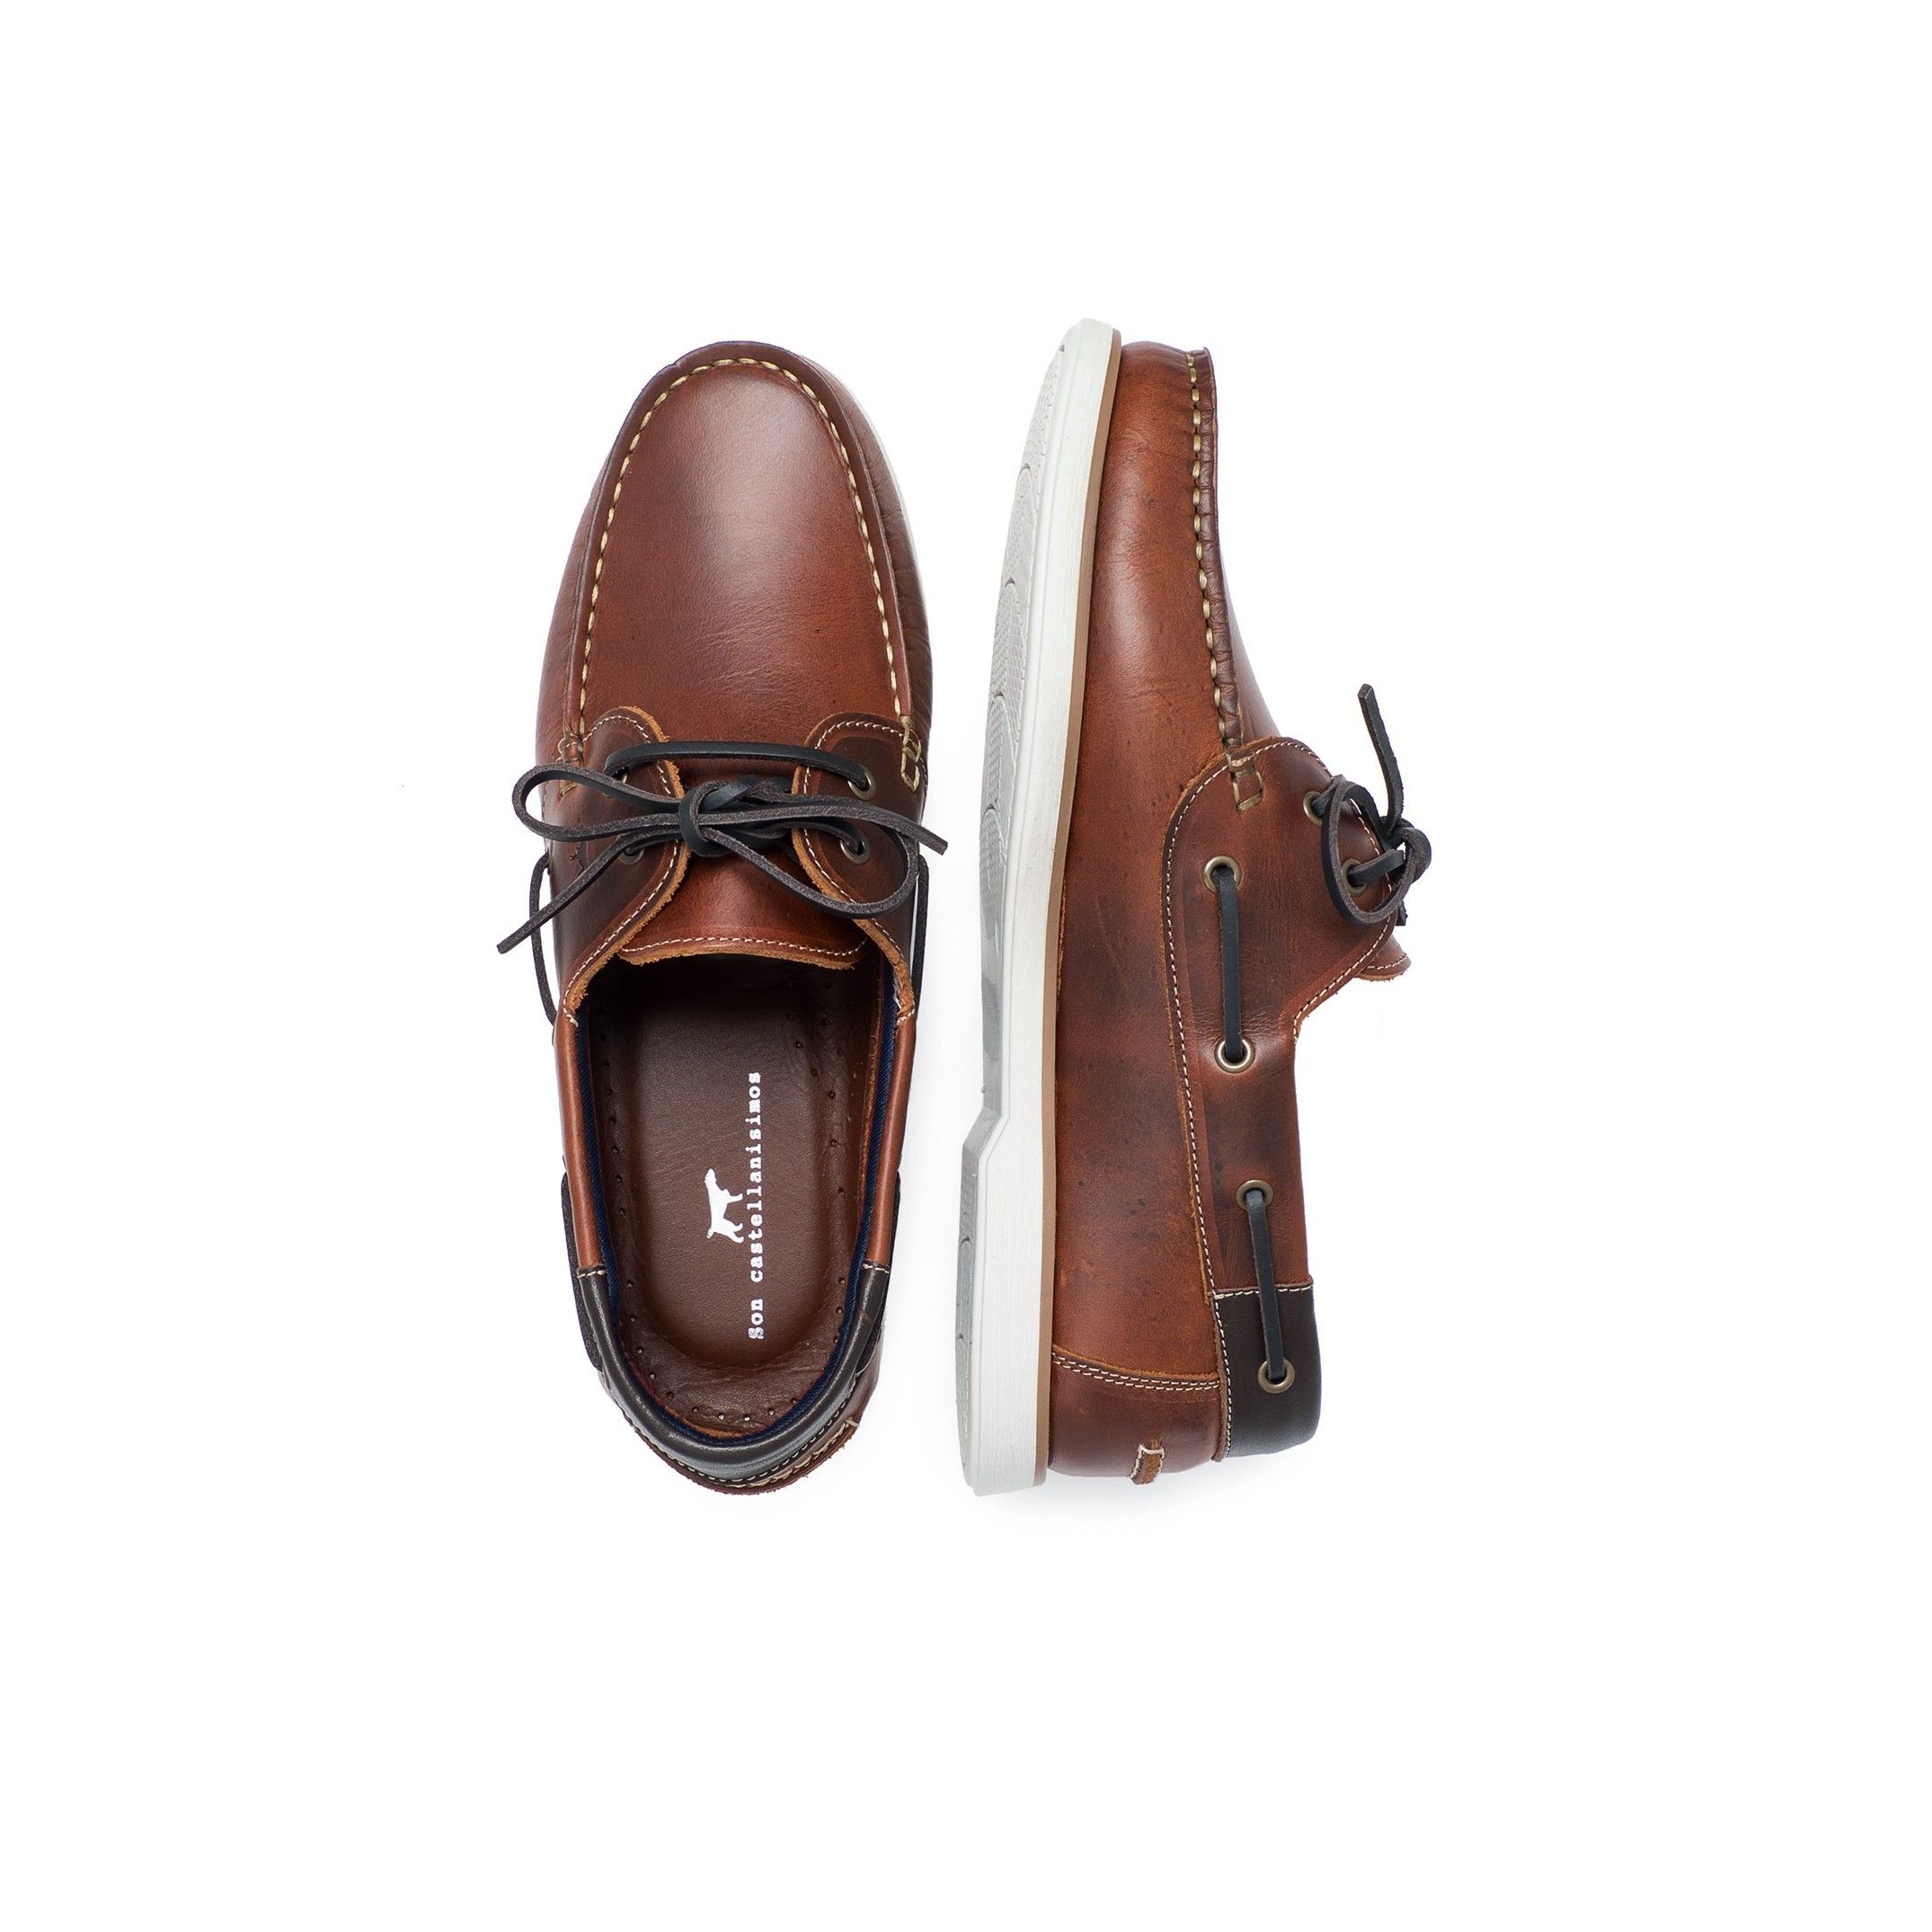 Leather boat shoes, by Son Castellanisimos. Upper made of cowhide leather. Leather laces closure. Inner and insole made of cowhide leather. Sole material: synthetic and non-slip. Heel height: 1,5 cm. Designed and made in Spain.